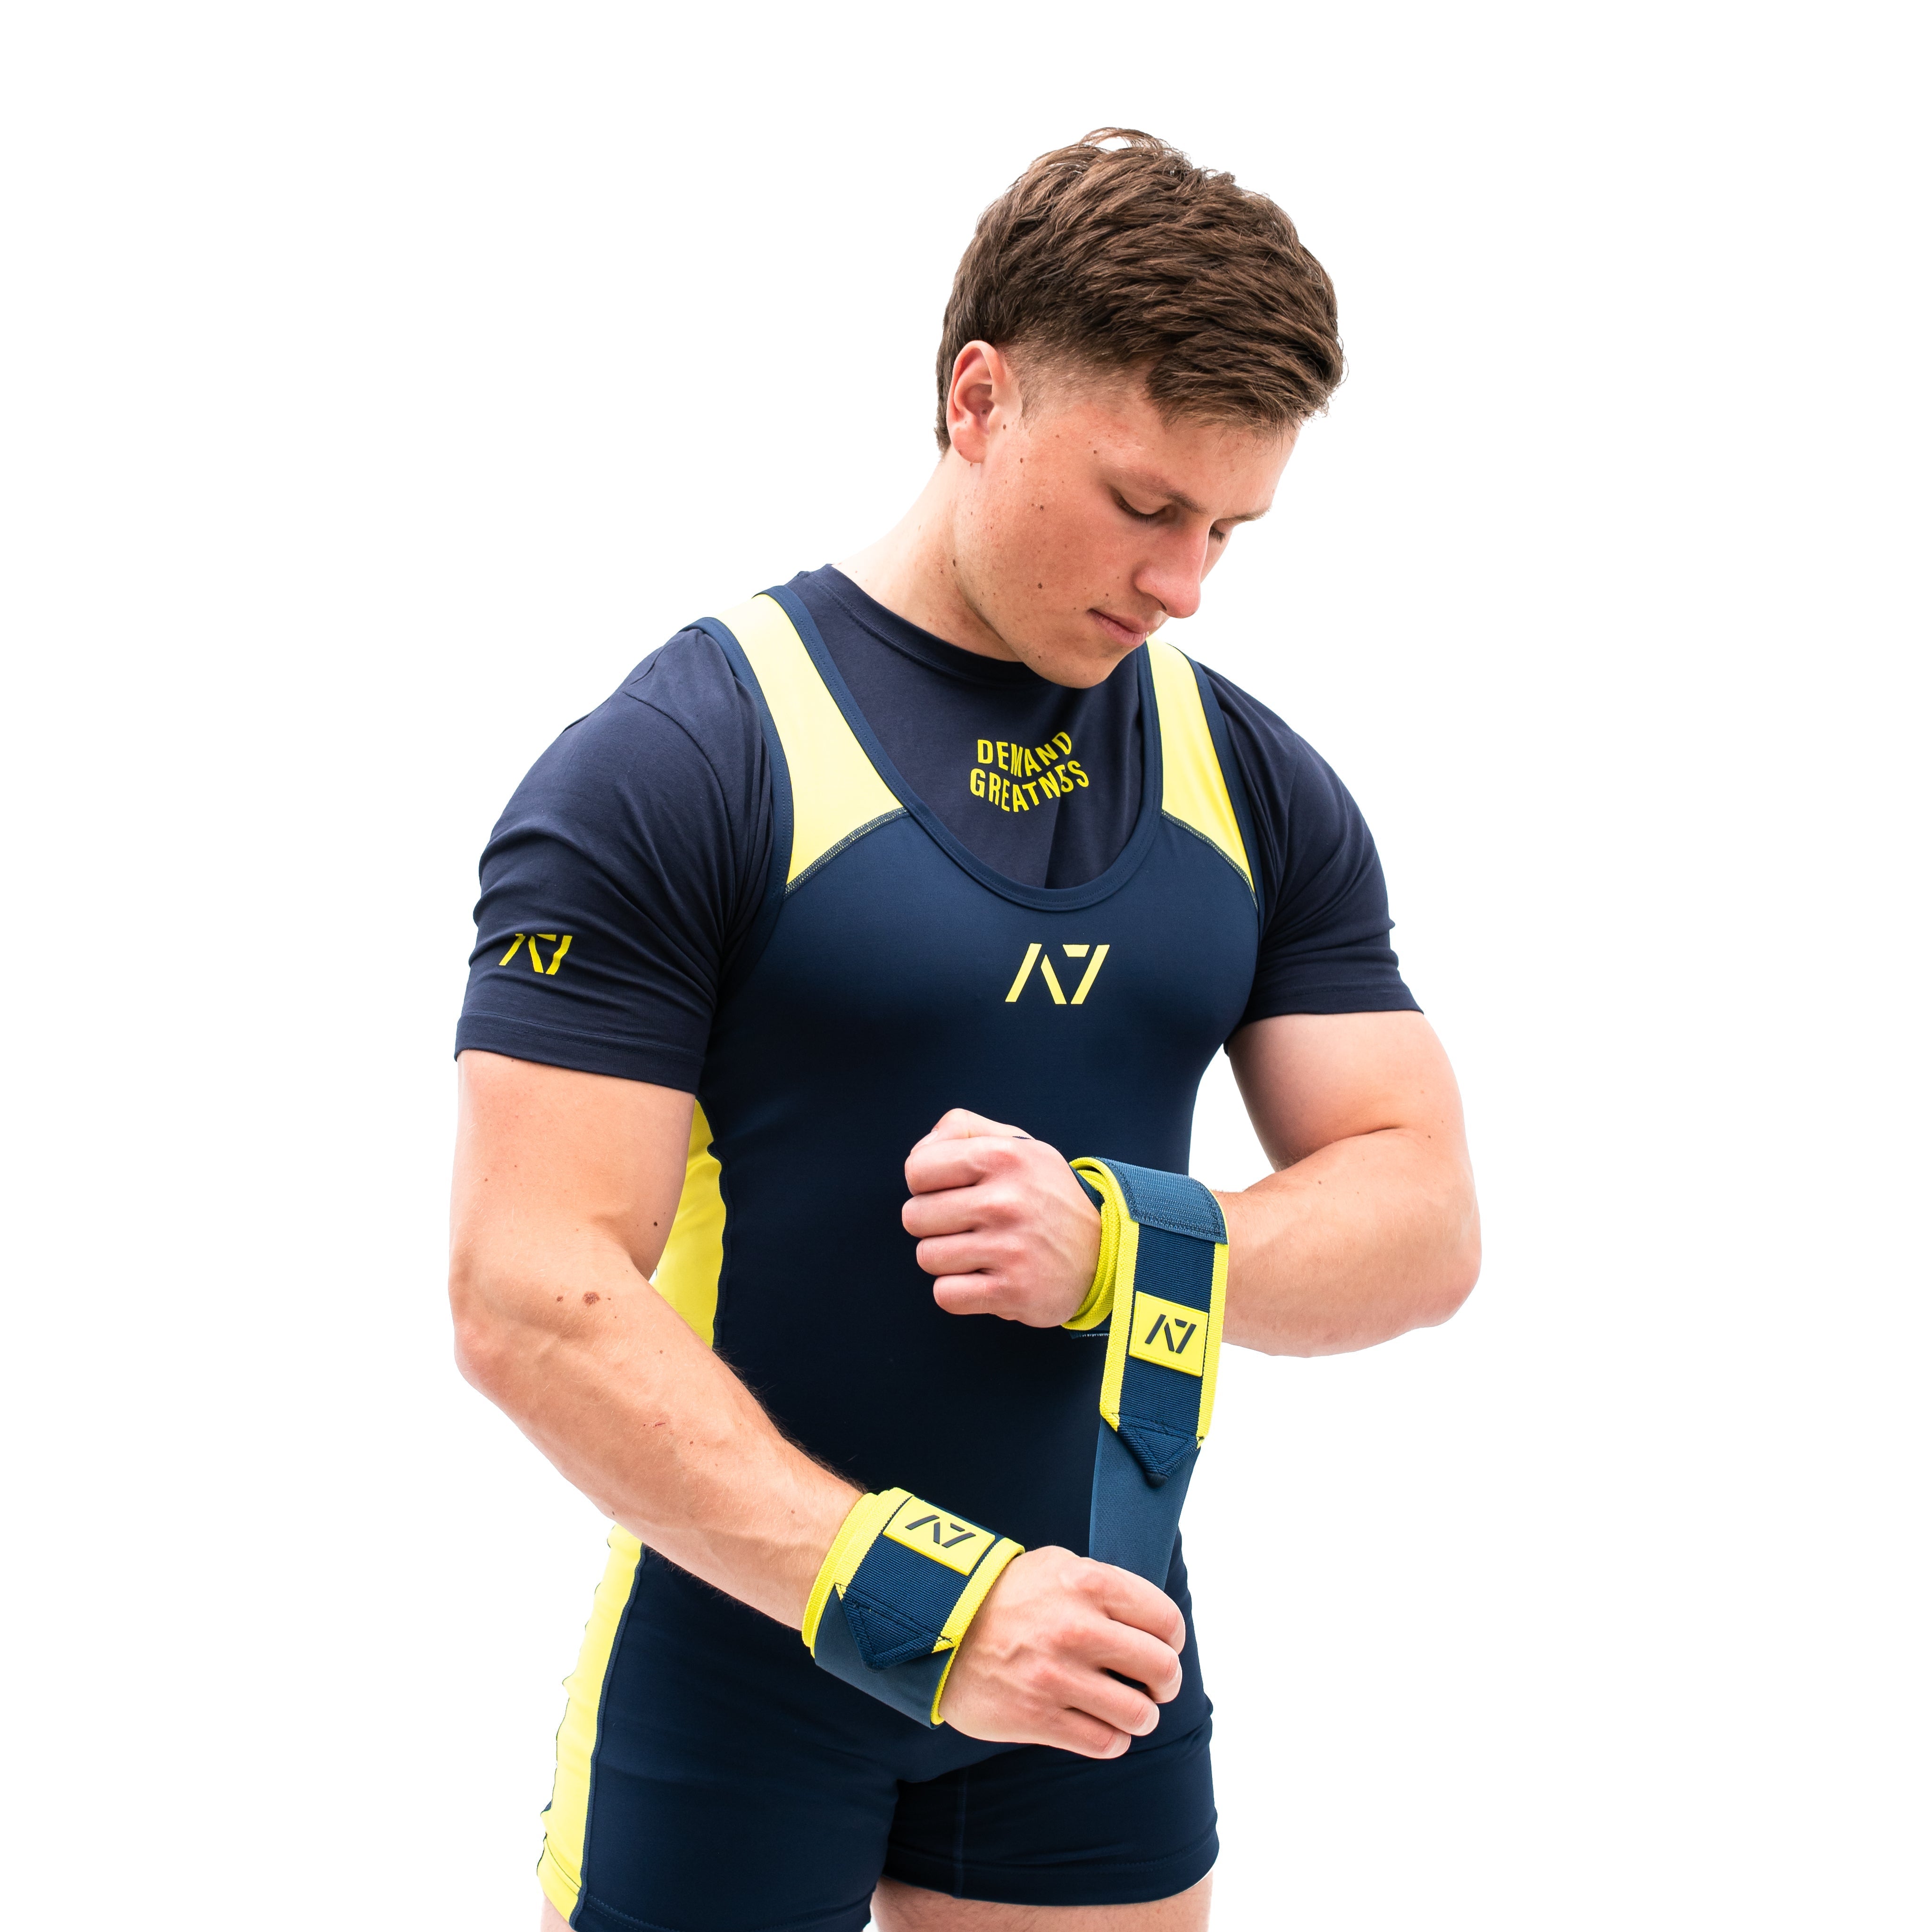 This Electric Lemonade colourway is a refreshing cup of lemonade on a hot day. A colourway that stands out on the platform, while still providing the level of quality, support and comfort you demand from your products. These wrist wraps will remind you to bring your electricity to hit those lifts. These wrist wraps are a perfect addition to your IPF approved kit.